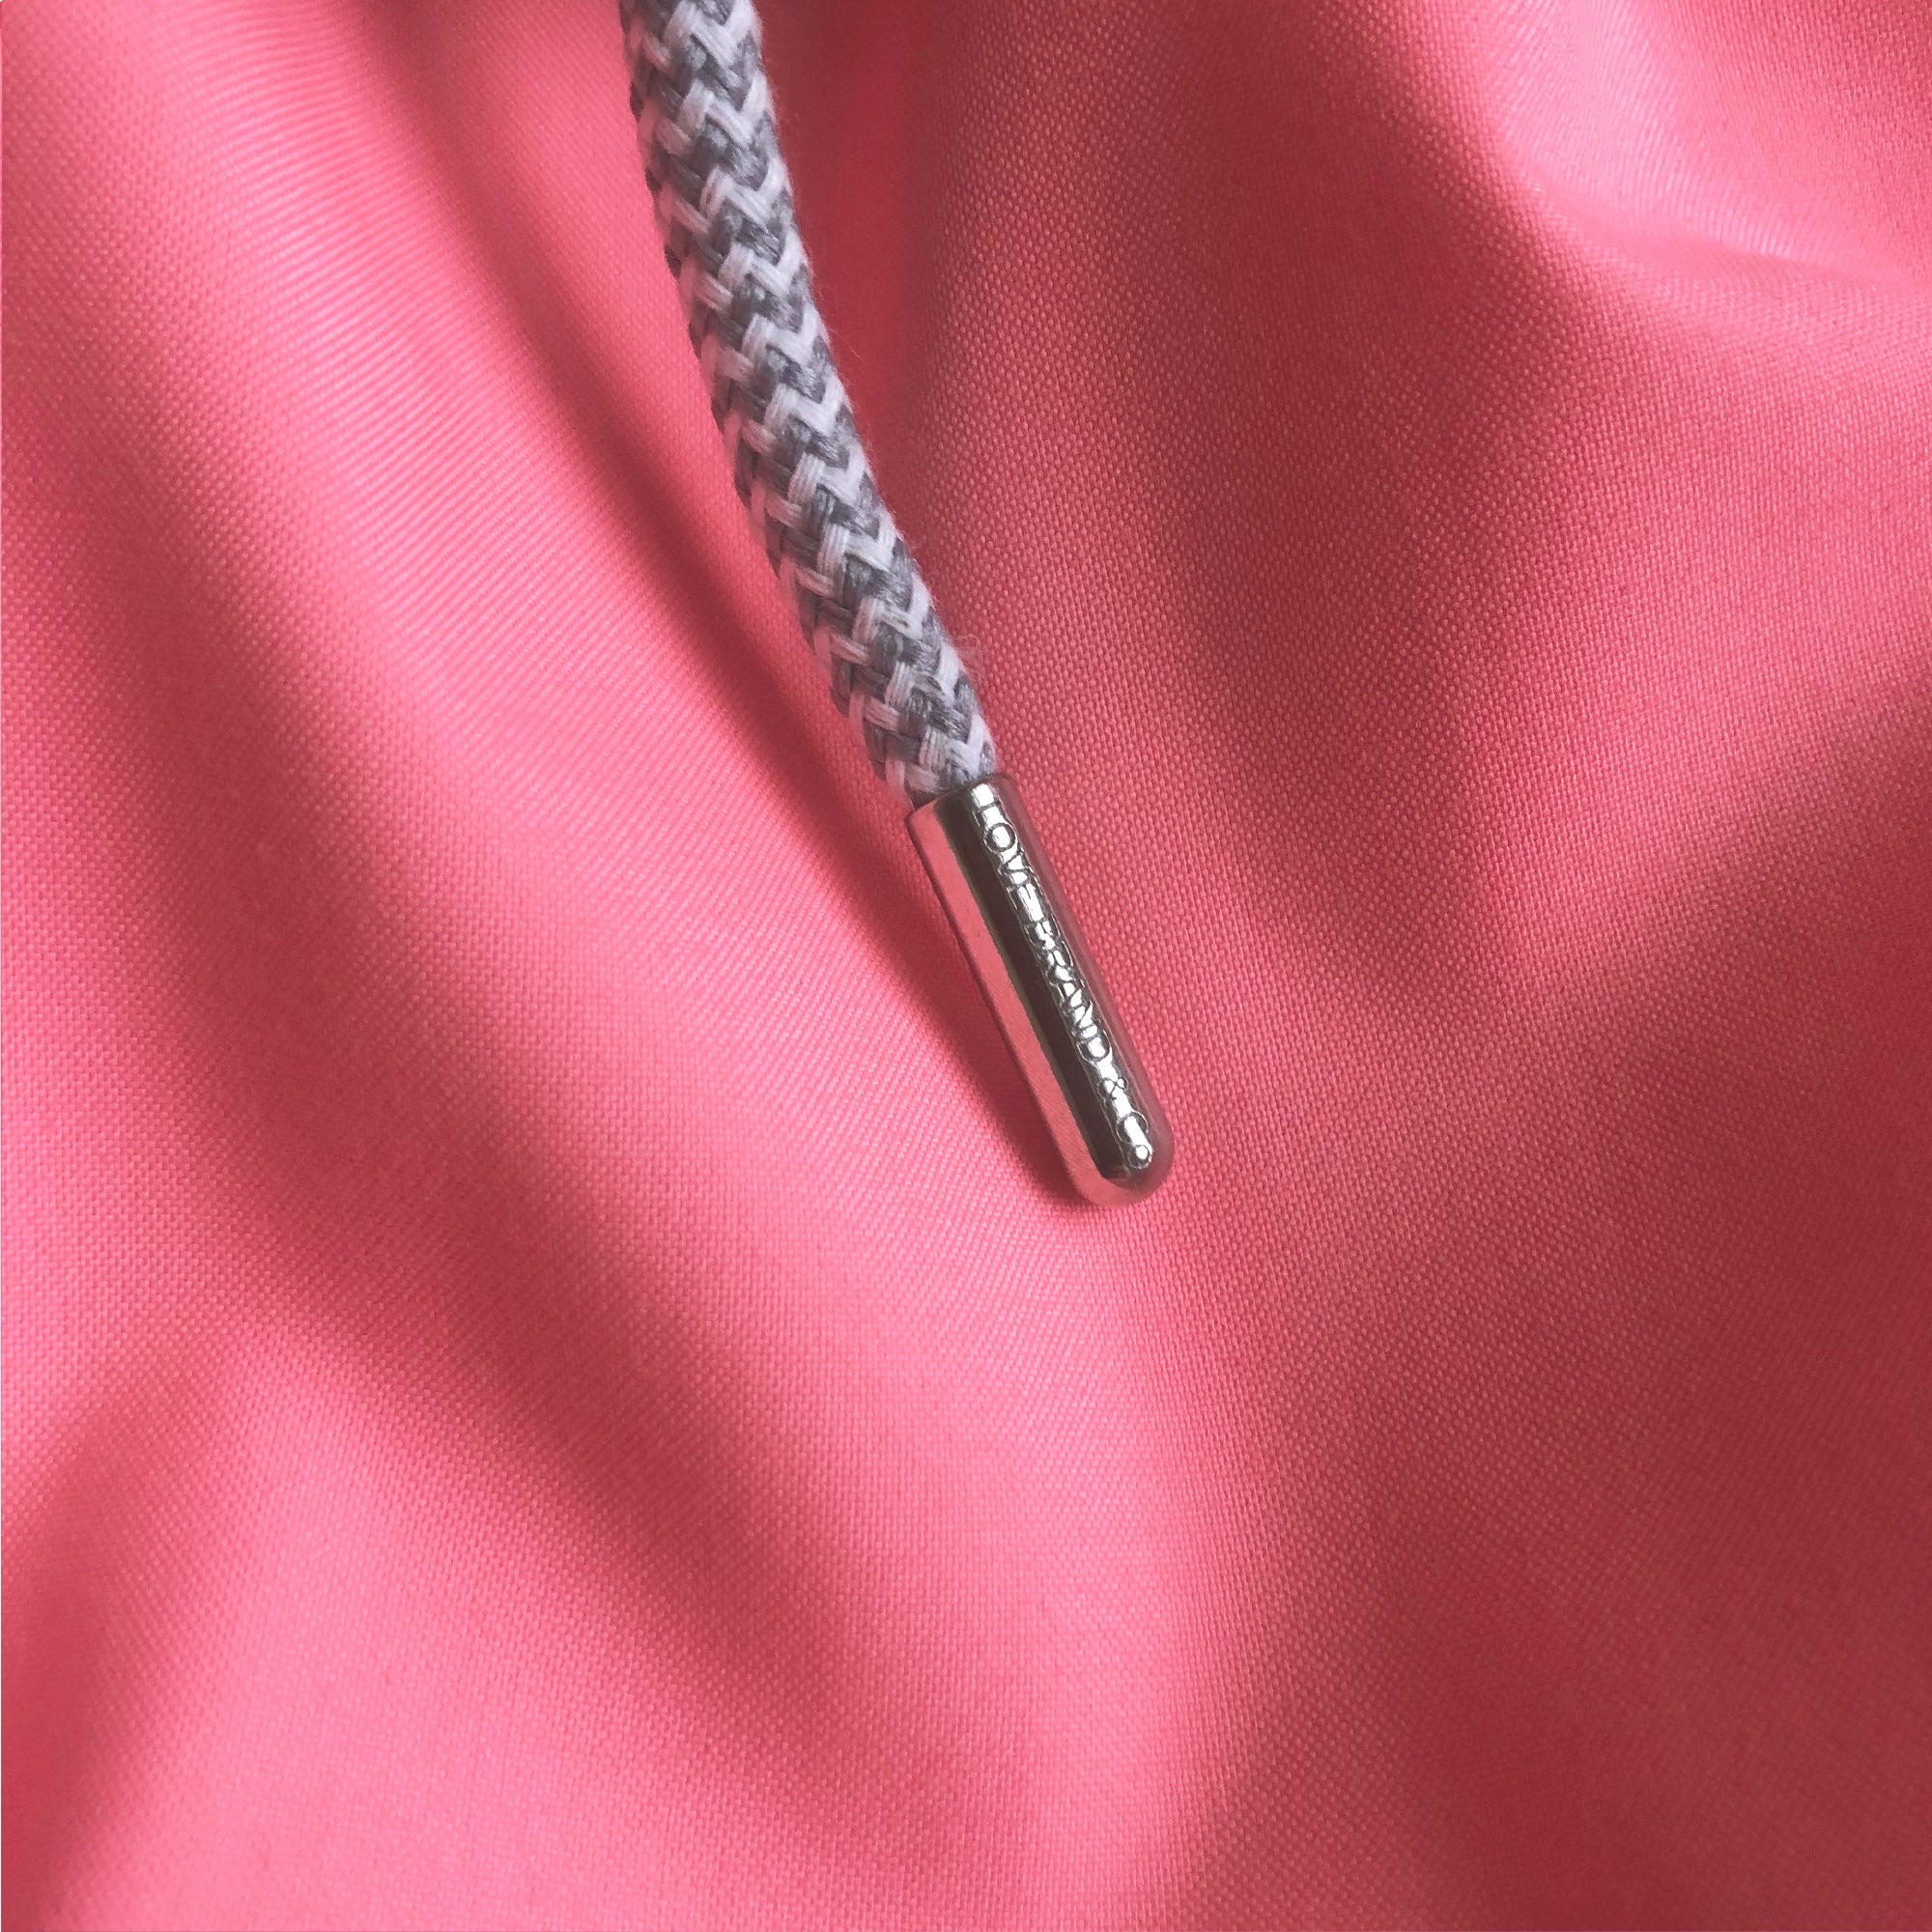 Close-up of the Men's Watermelon Staniel Swim Shorts fabric and drawstring detail in bright pink-red.